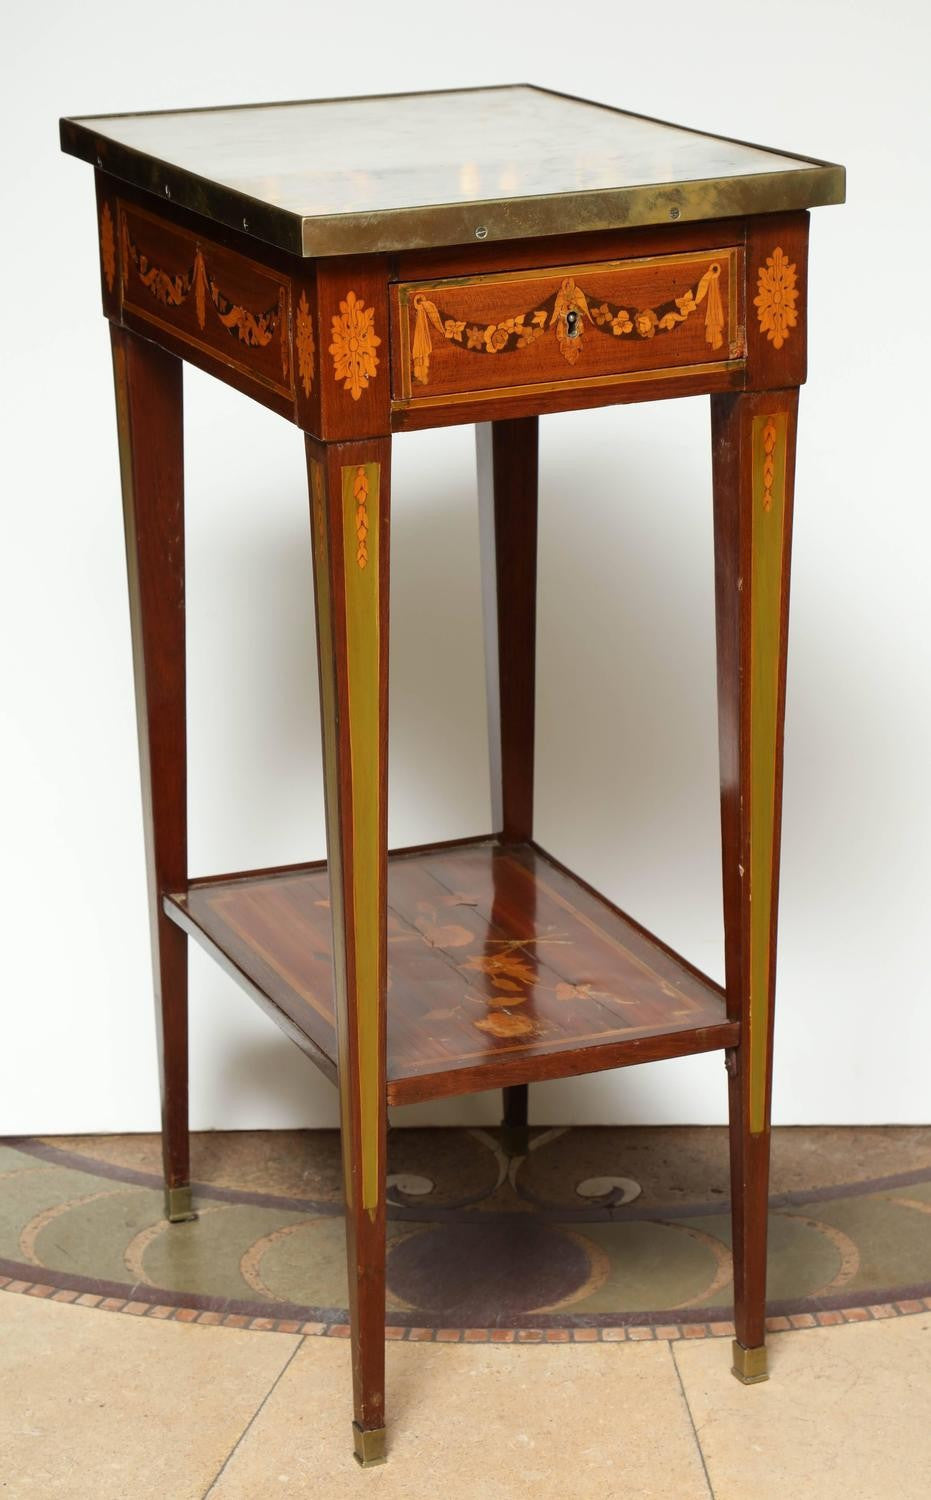 Antique French Louis XVI style mahogany end table.